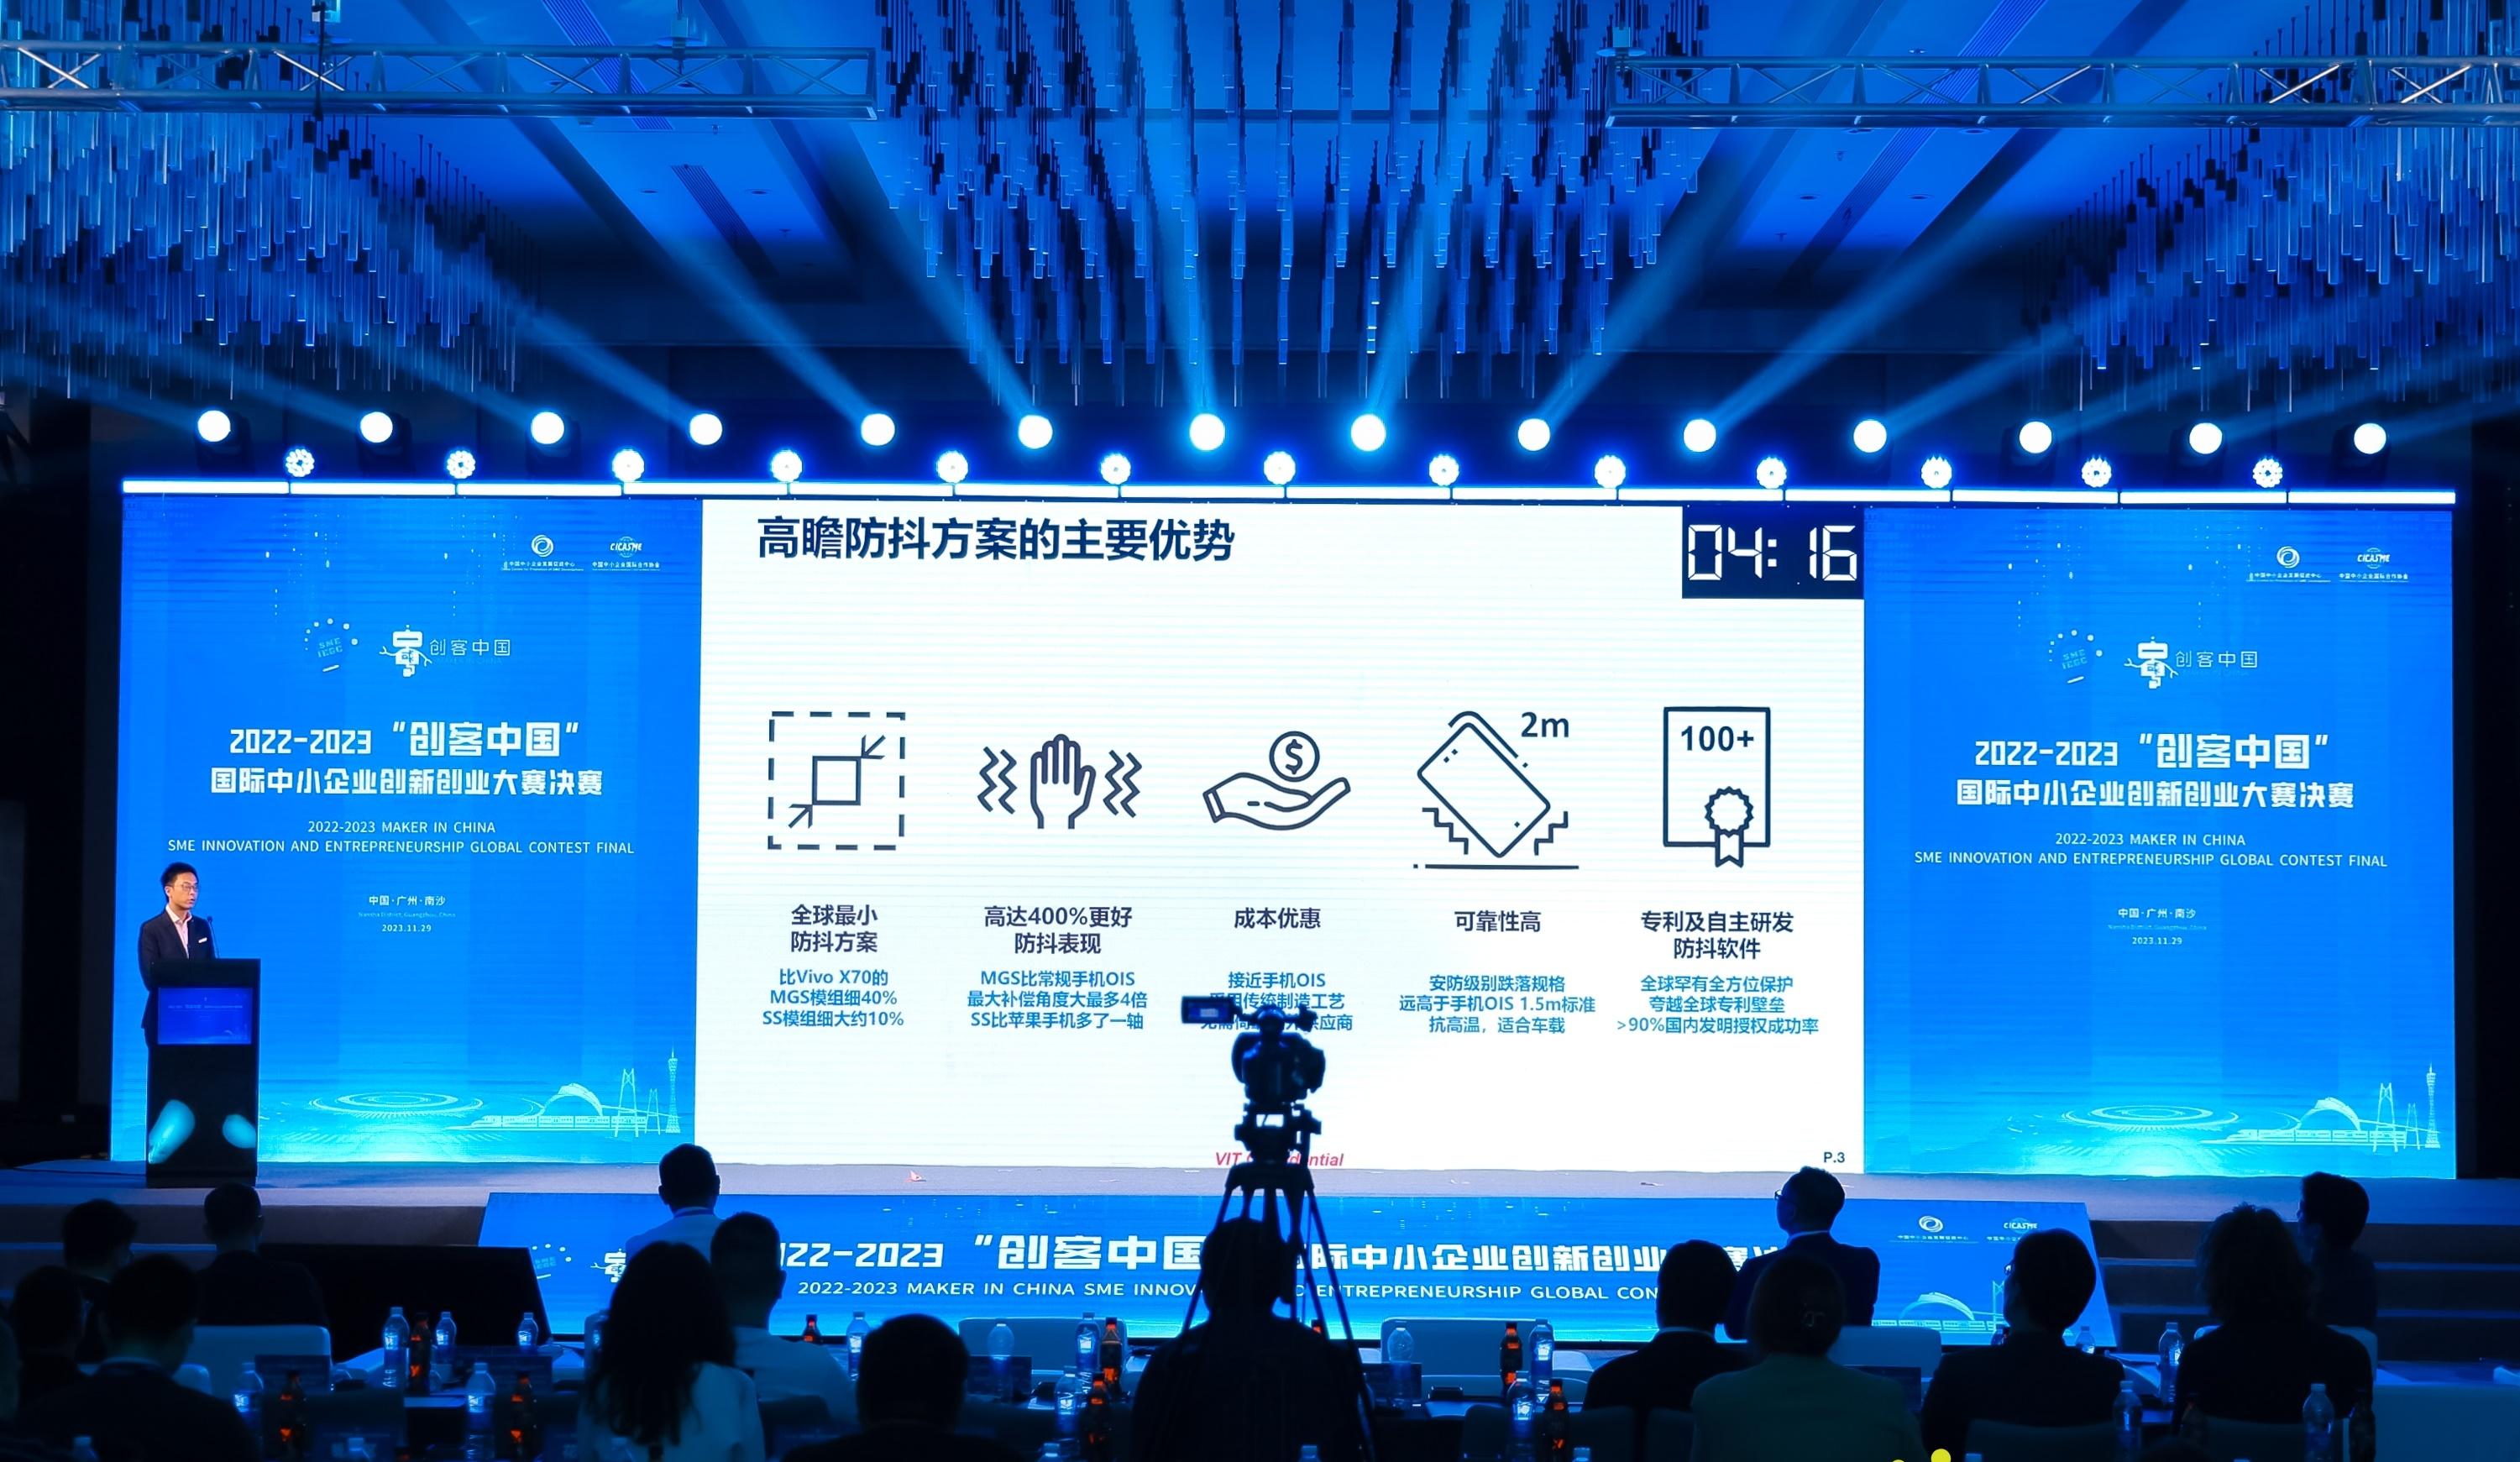 At the Maker in China SME Innovation and Entrepreneurship Global Contest (MiC Global Contest) 2022 Final today (November 29), Hong Kong representative team Vista Innotech Limited was awarded champion of the global contest. Photo shows a representative of the company presenting its projects.